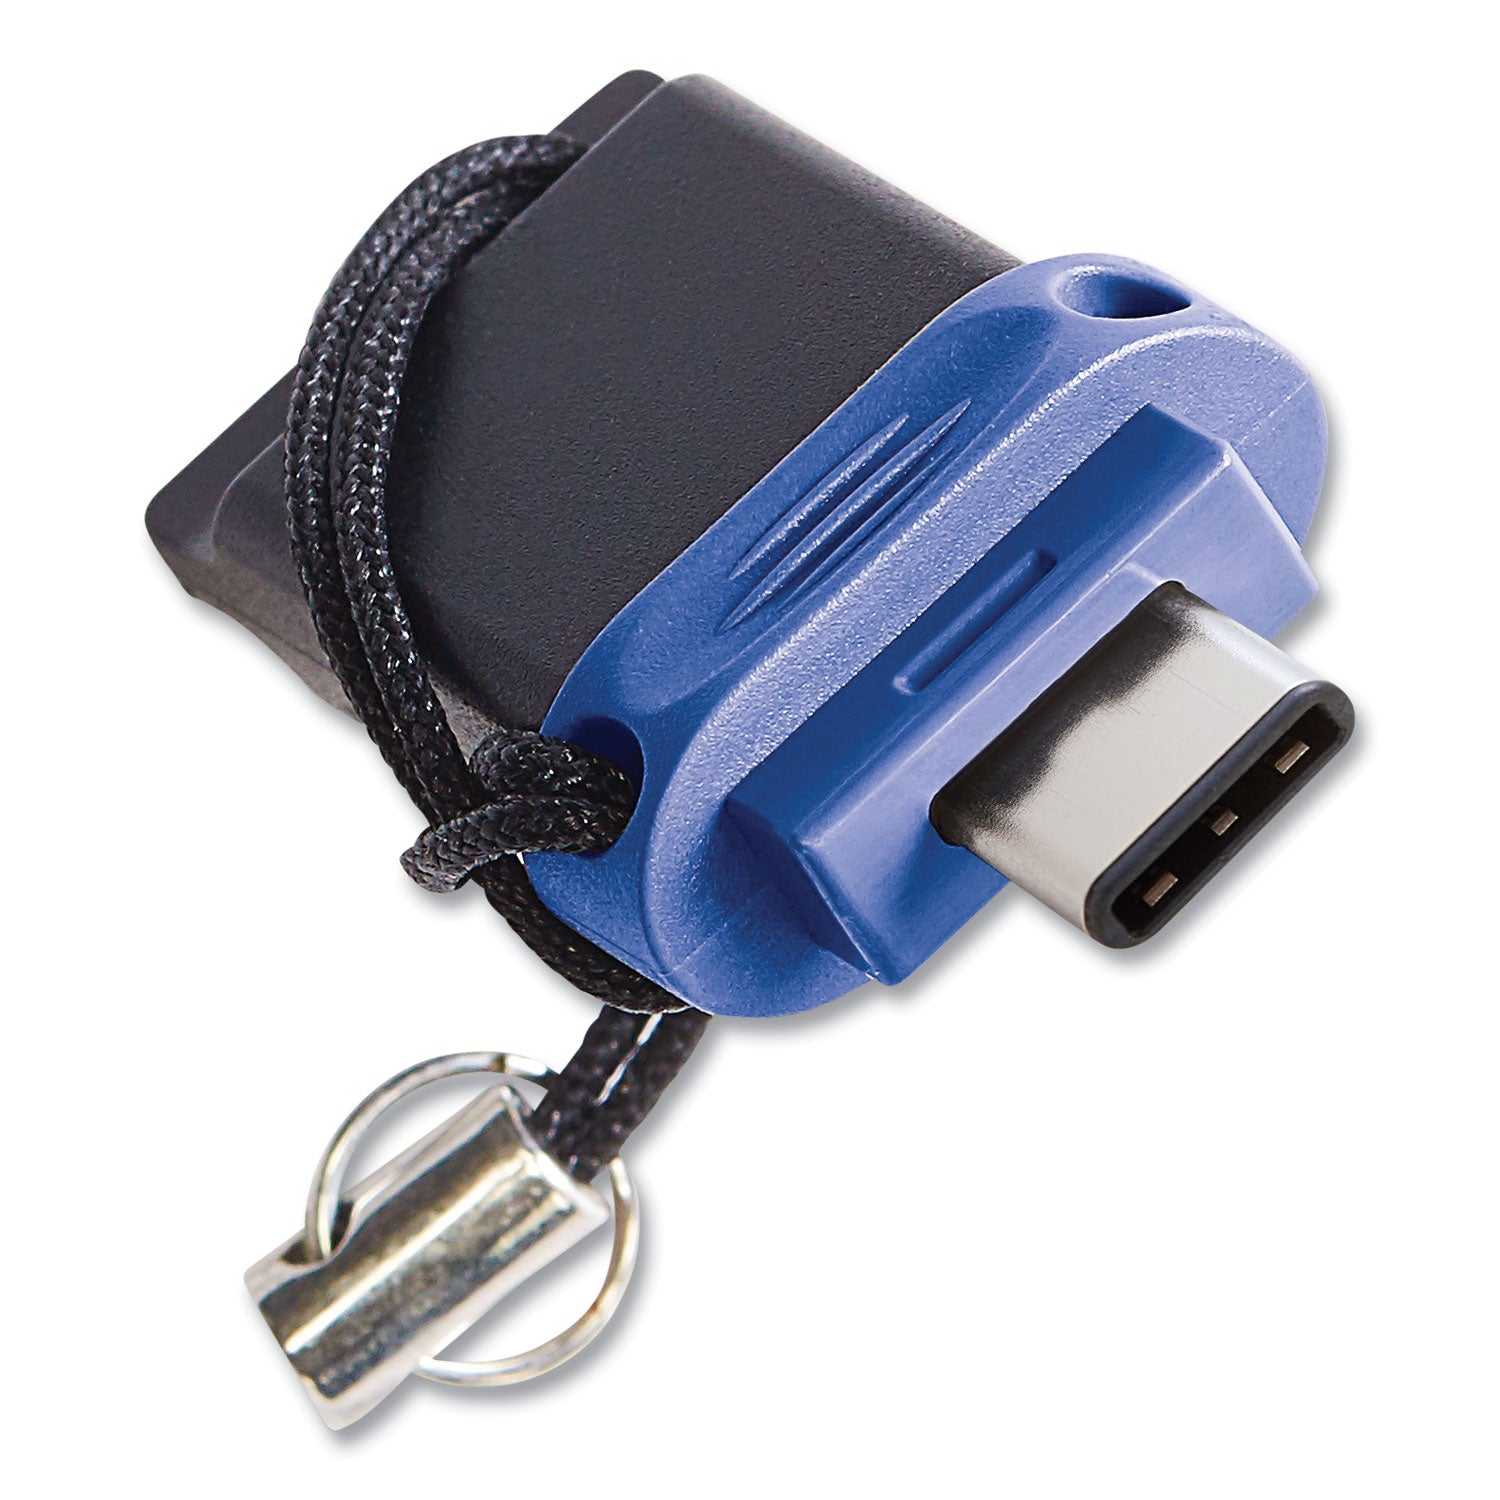 store-n-go-dual-usb-30-flash-drive-for-usb-c-devices-64-gb-blue_ver99155 - 7